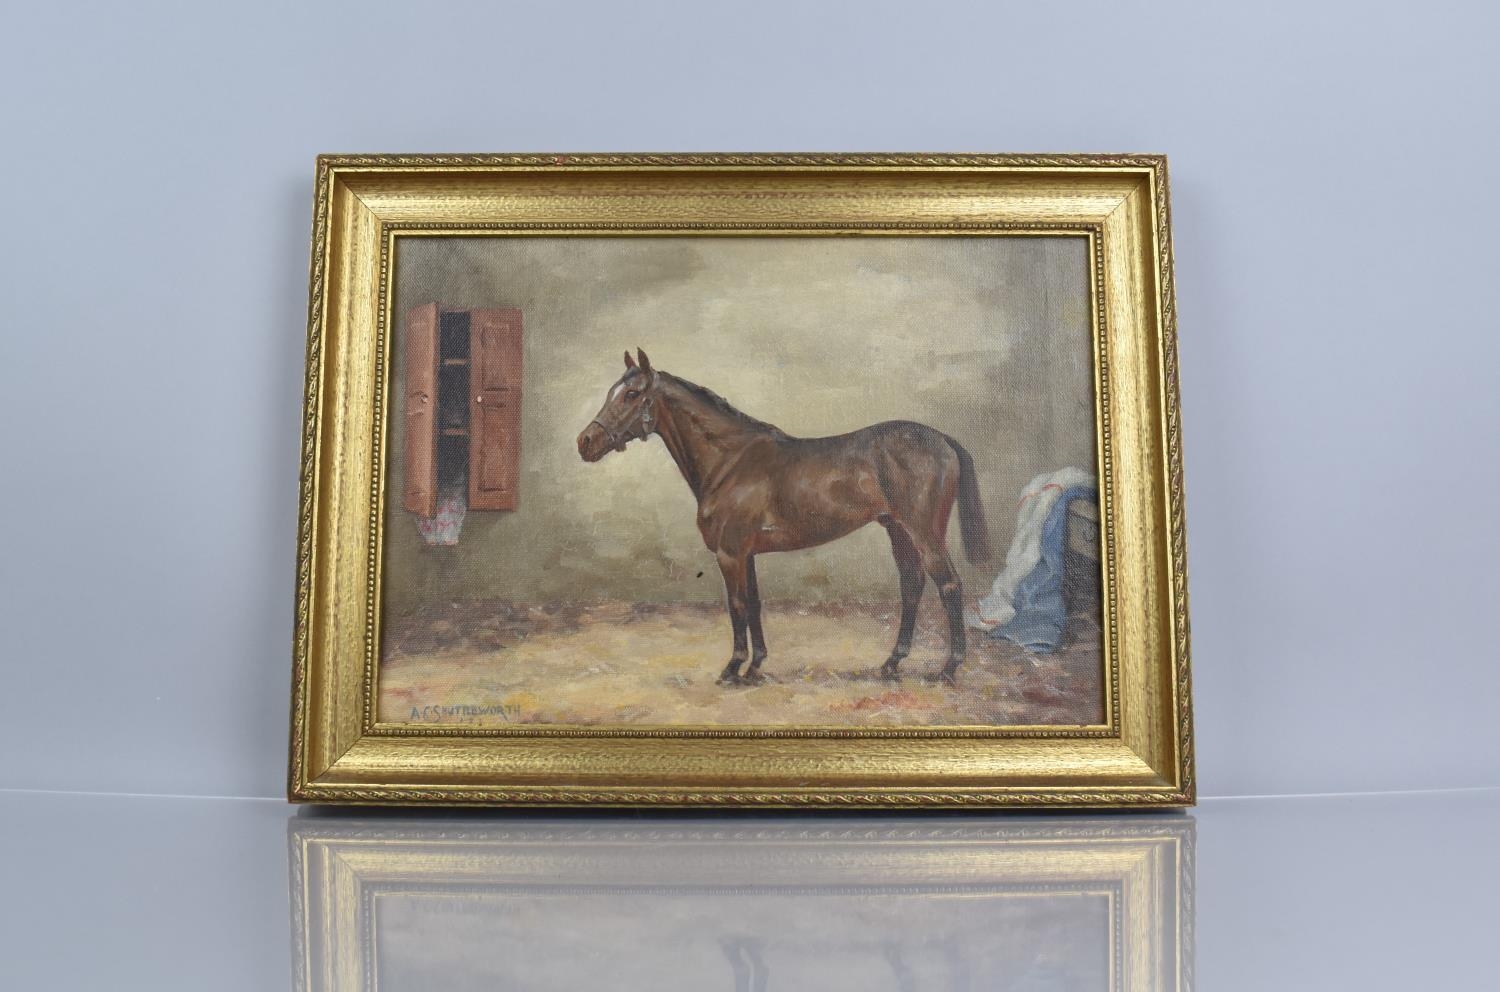 A 20th Century Oil on Board, English School, Interior Stable Scene with Horse Signed A.G.